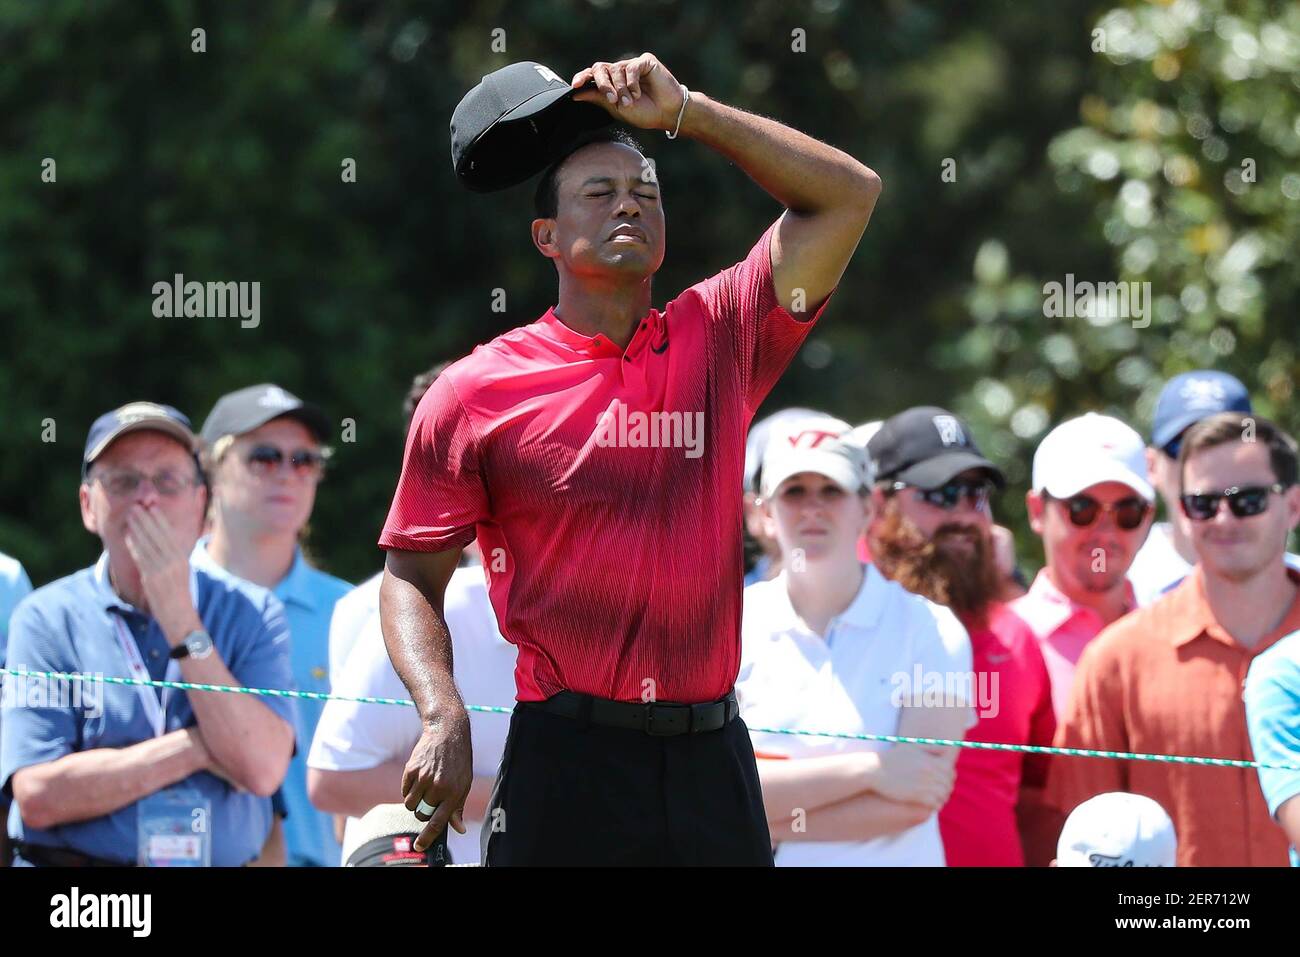 May 6, 2018; Charlotte, NC, USA; Tiger Woods during the final round of the Wells Fargo Championship golf tournament at Quail Hollow Club. Mandatory Credit: Jim Dedmon-USA TODAY Sports Stock Photo